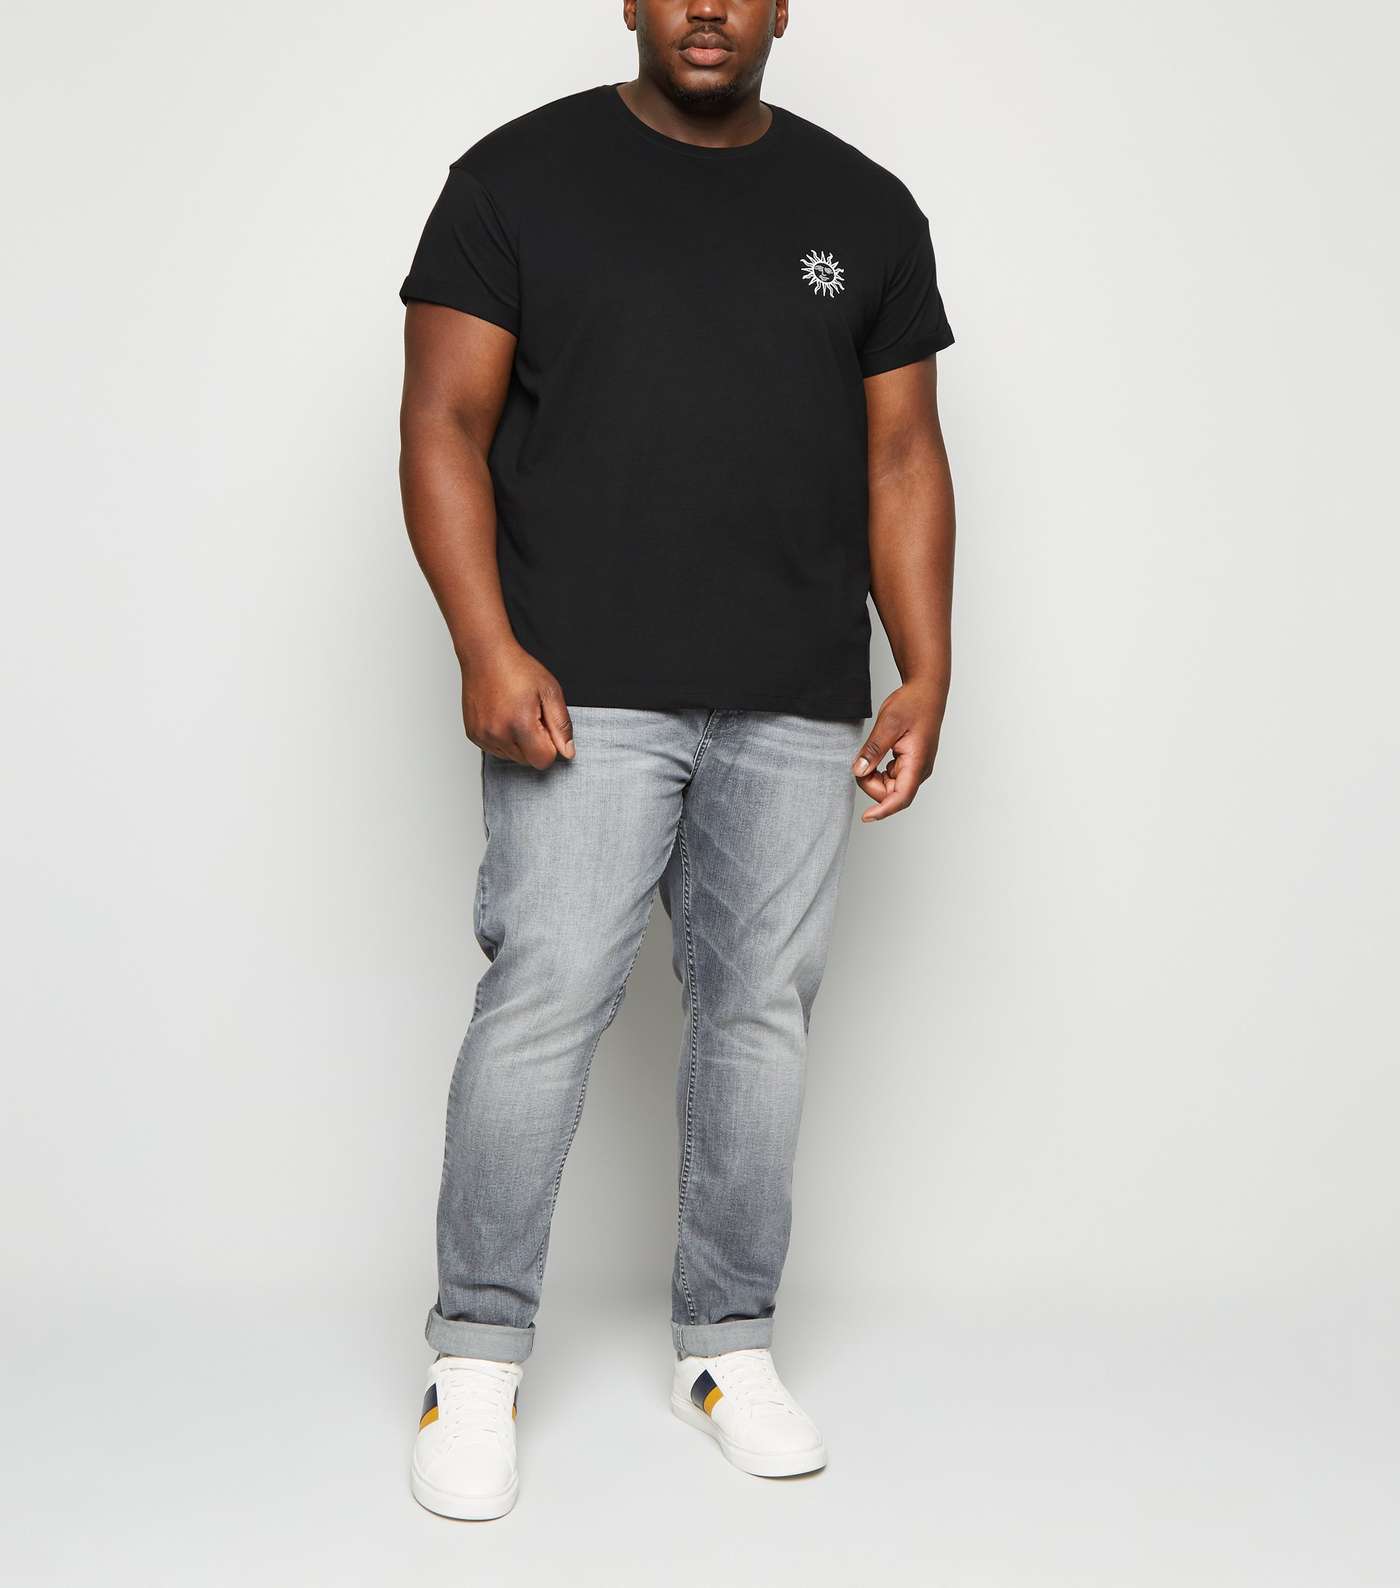 Plus Size Black Sun Embroidered T-Shirt Image 2